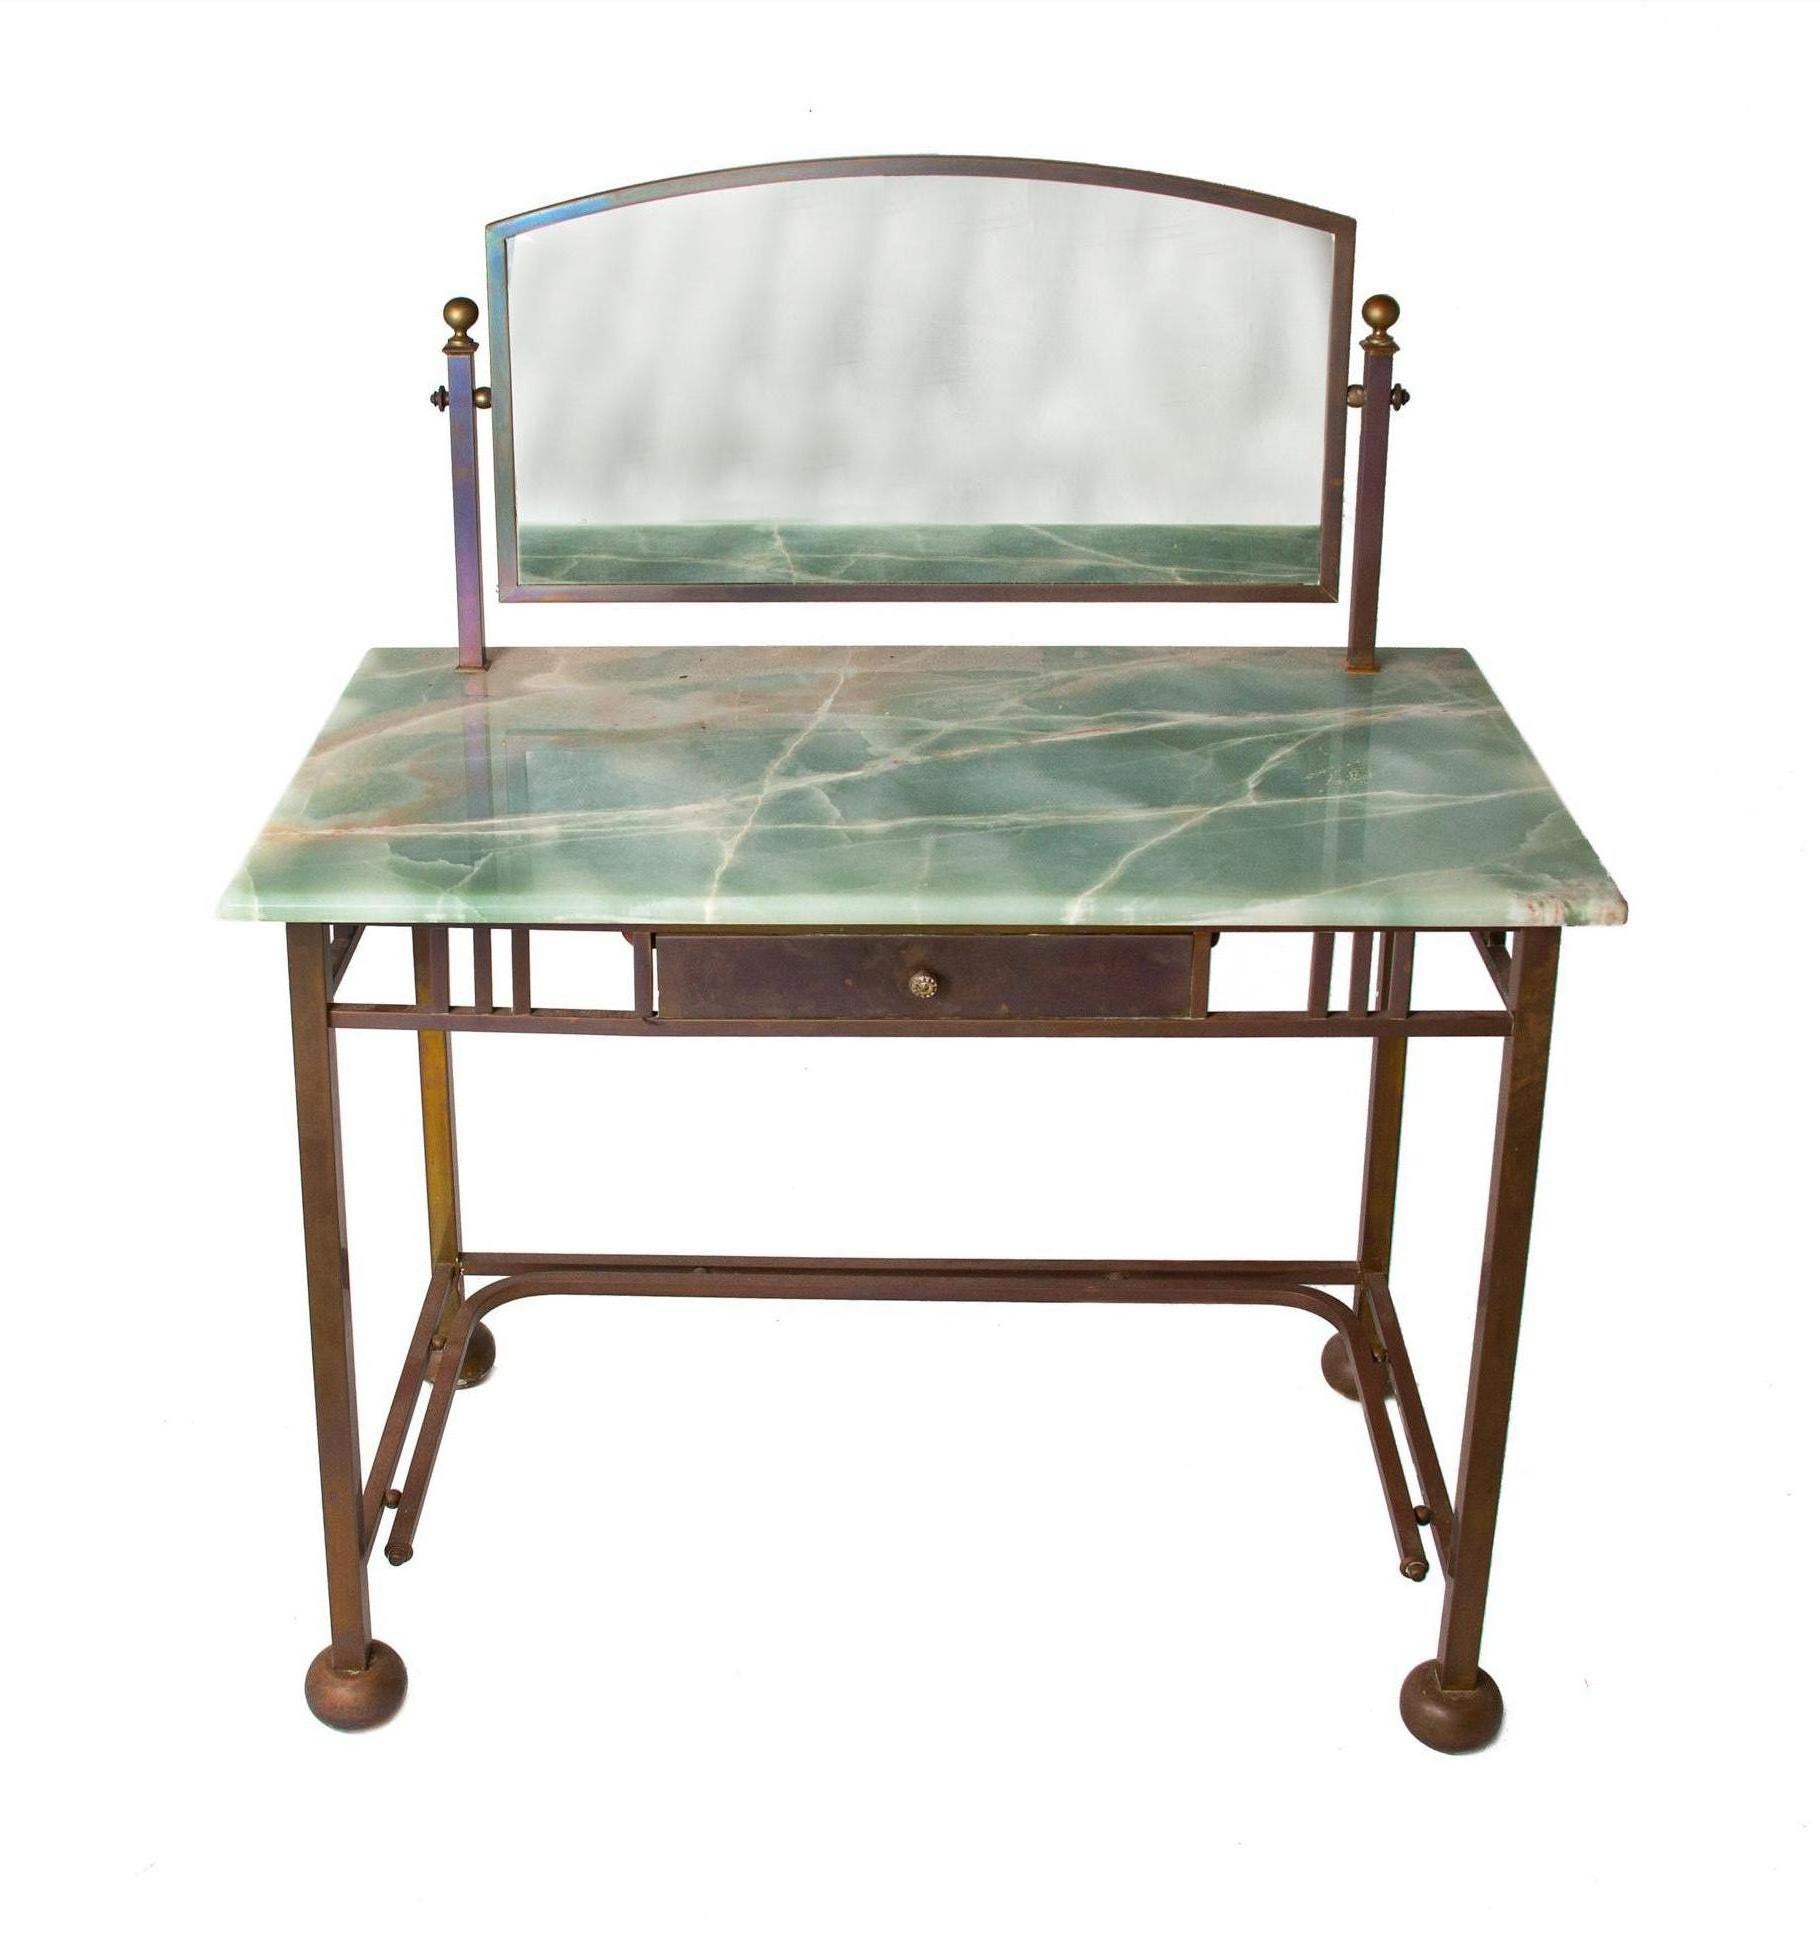 Rare Art Deco marble & brass dressing table with mirror made in France.

Brass hardware with pale green marble top and swivel mirror. Center drawer with brass face and knob measures 12 3/4